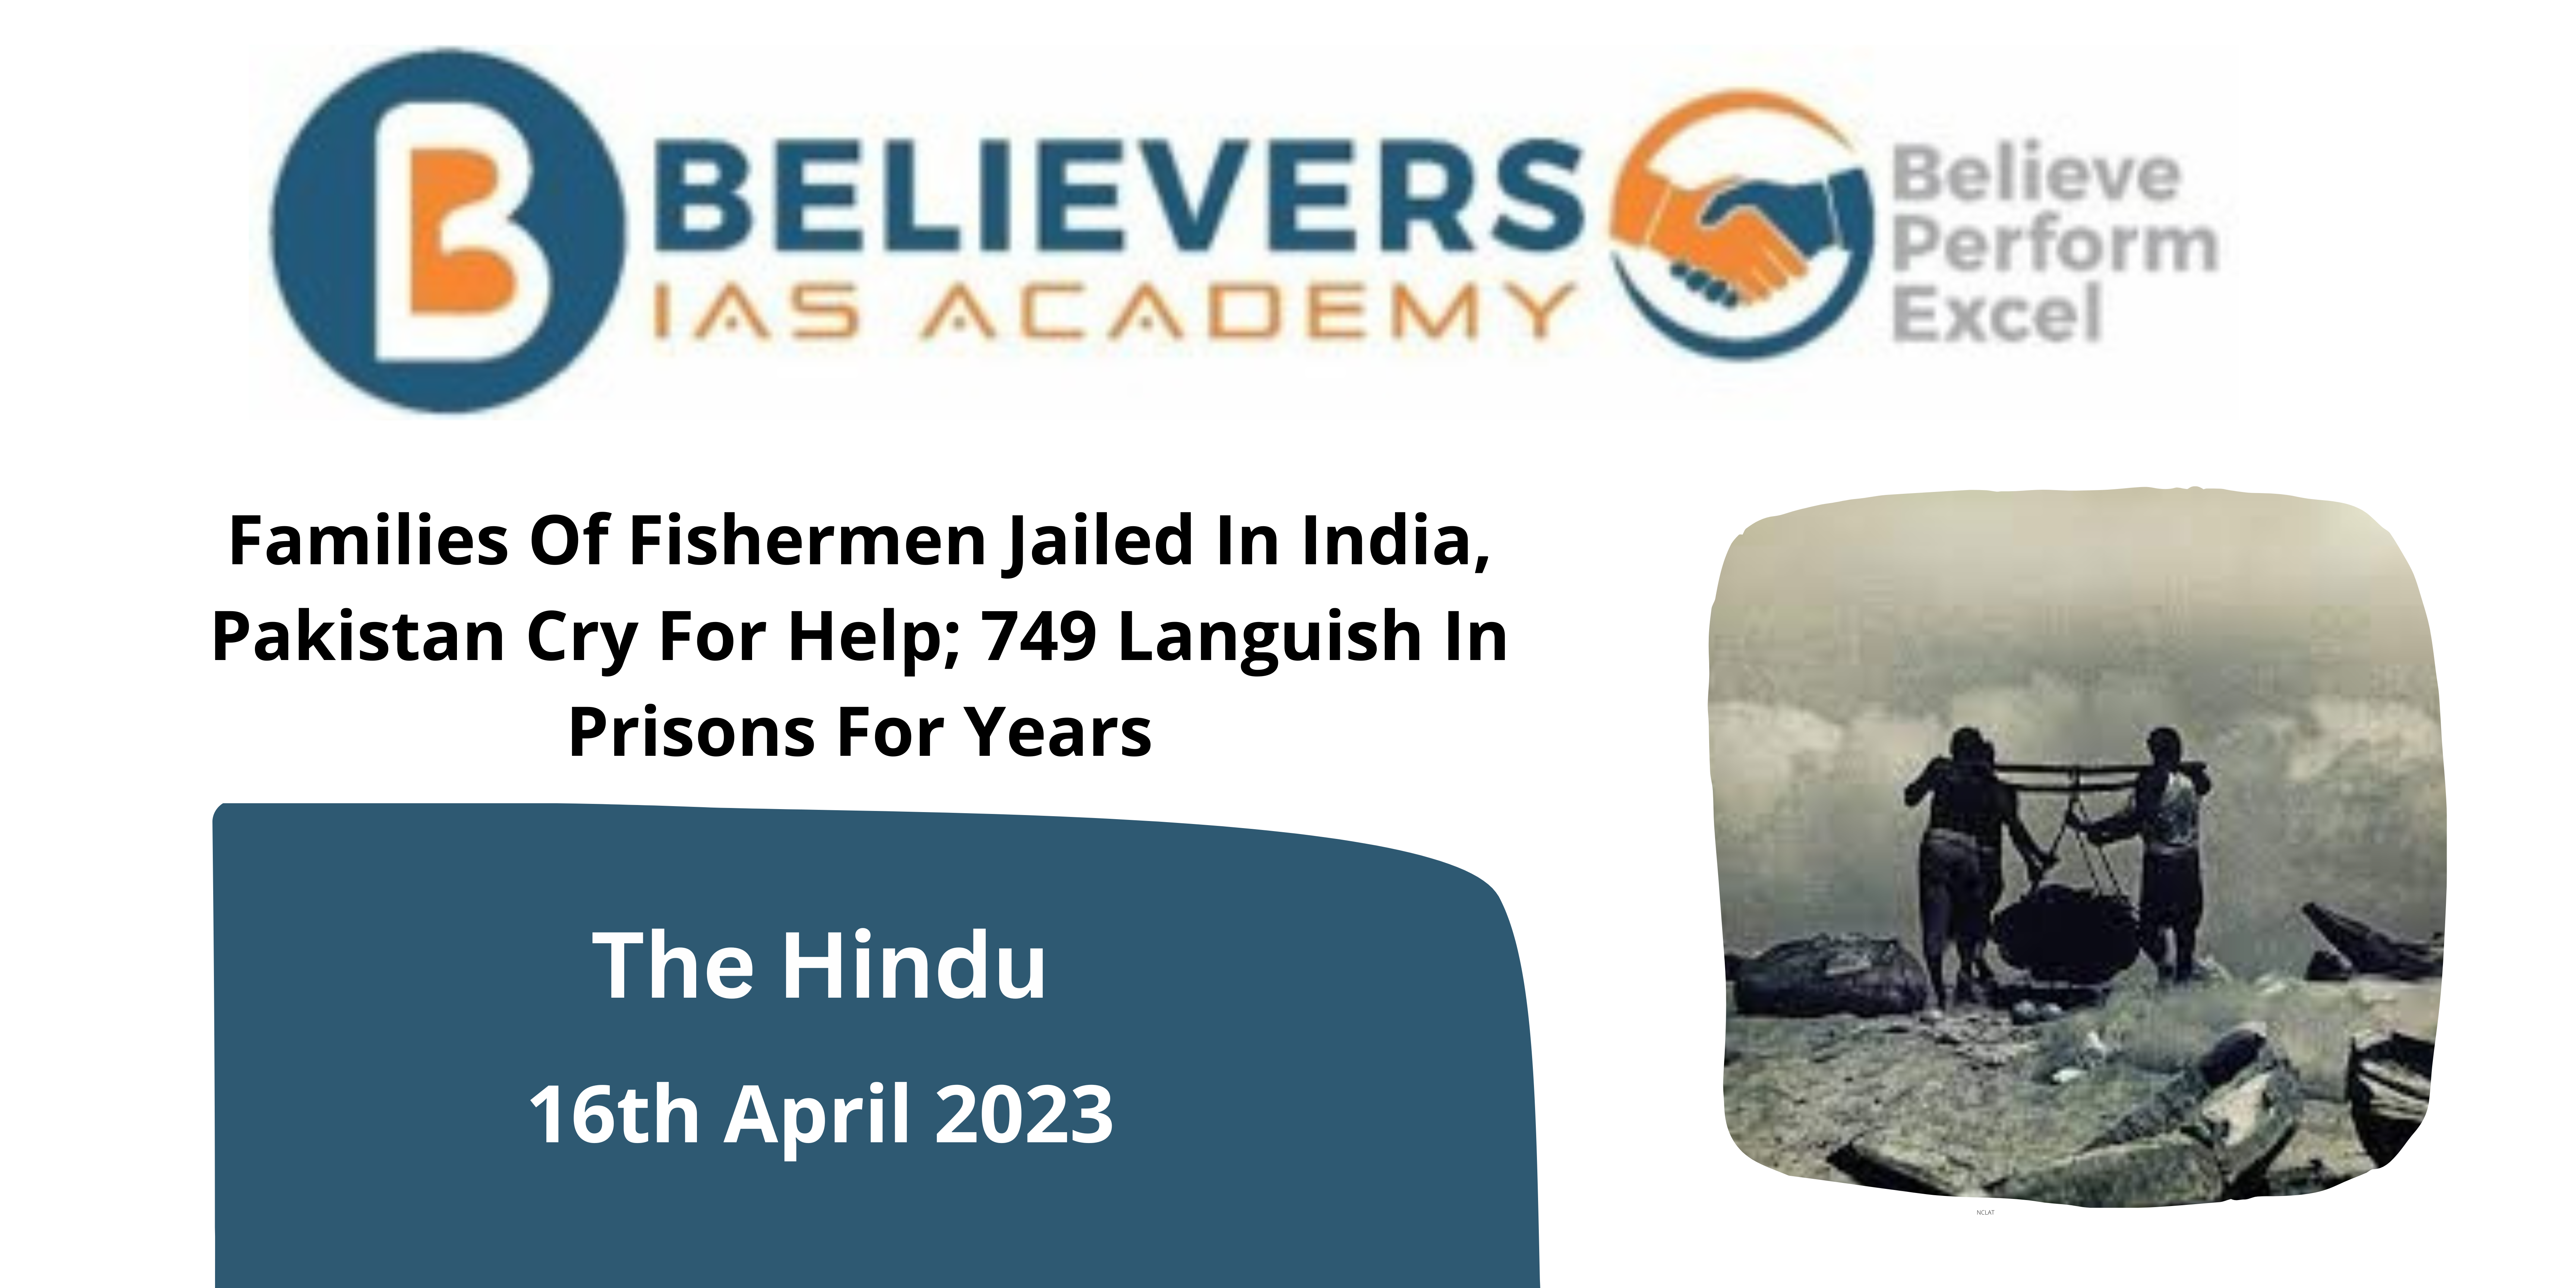 Families Of Fishermen Jailed In India, Pakistan Cry For Help; 749 Languish In Prisons For Years